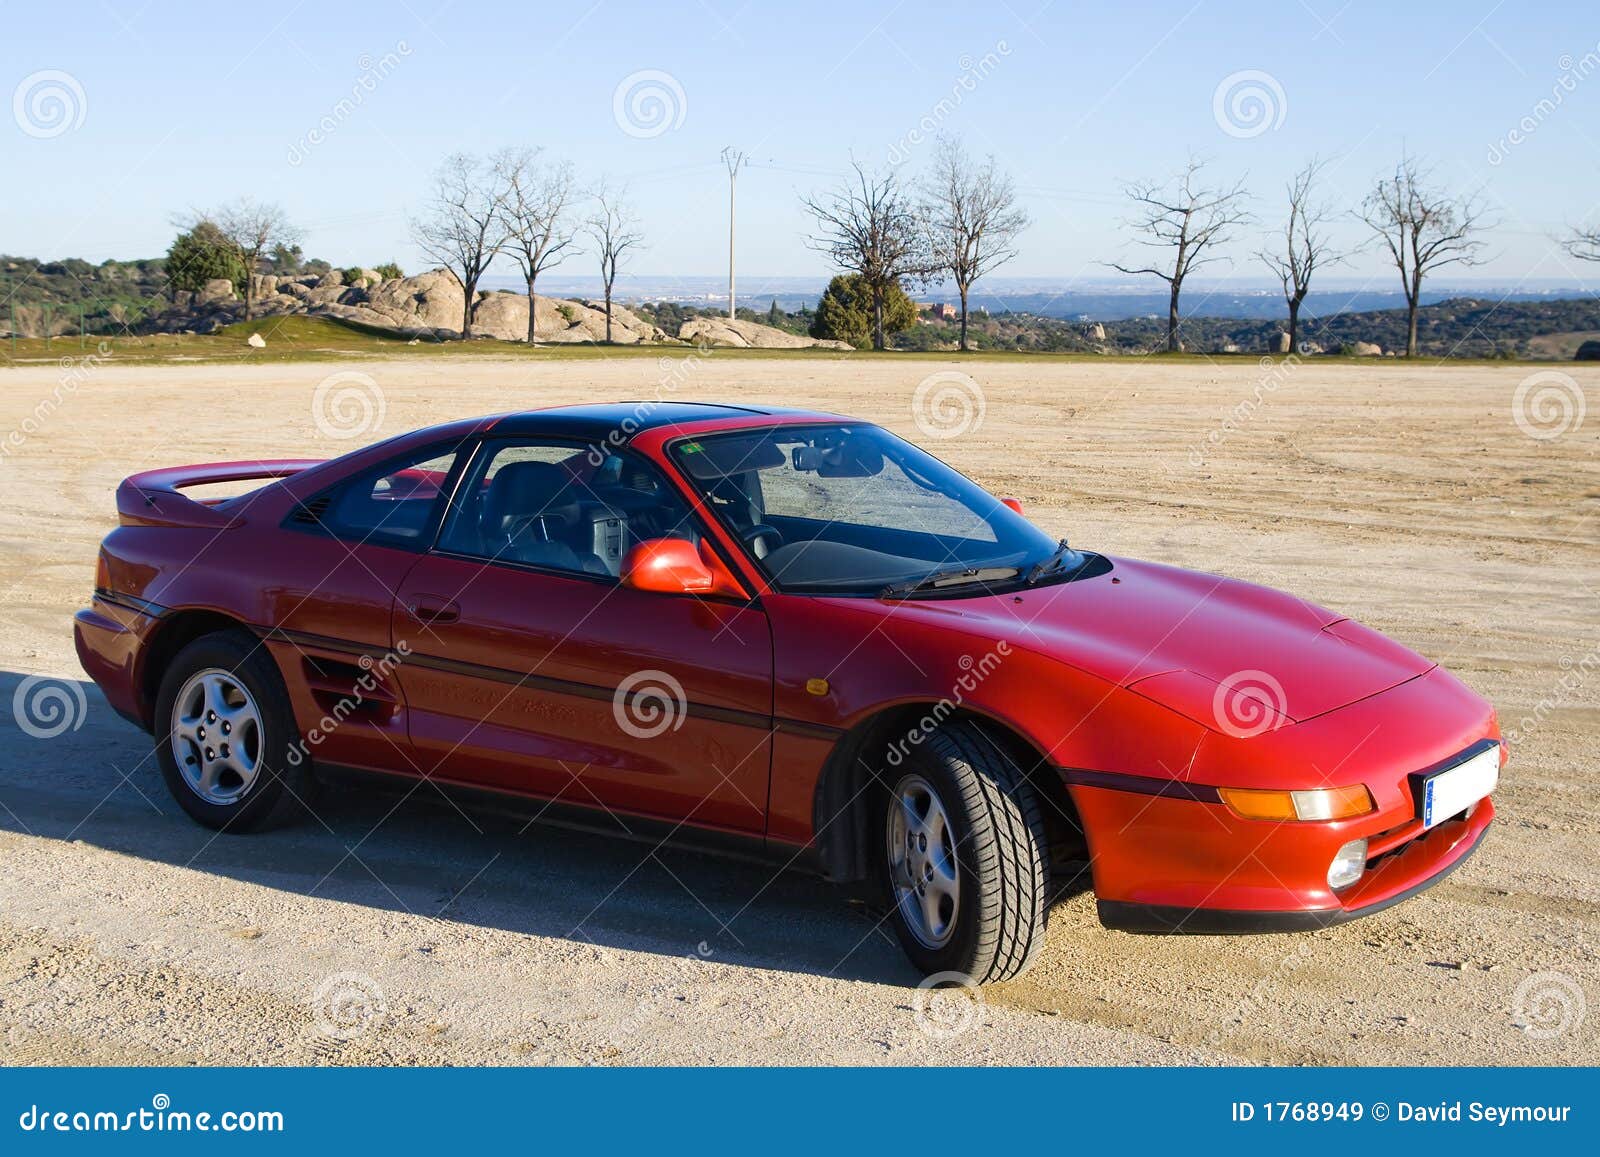 Classic Red Sports Car. Royalty Free Stock Images  Image: 1768949